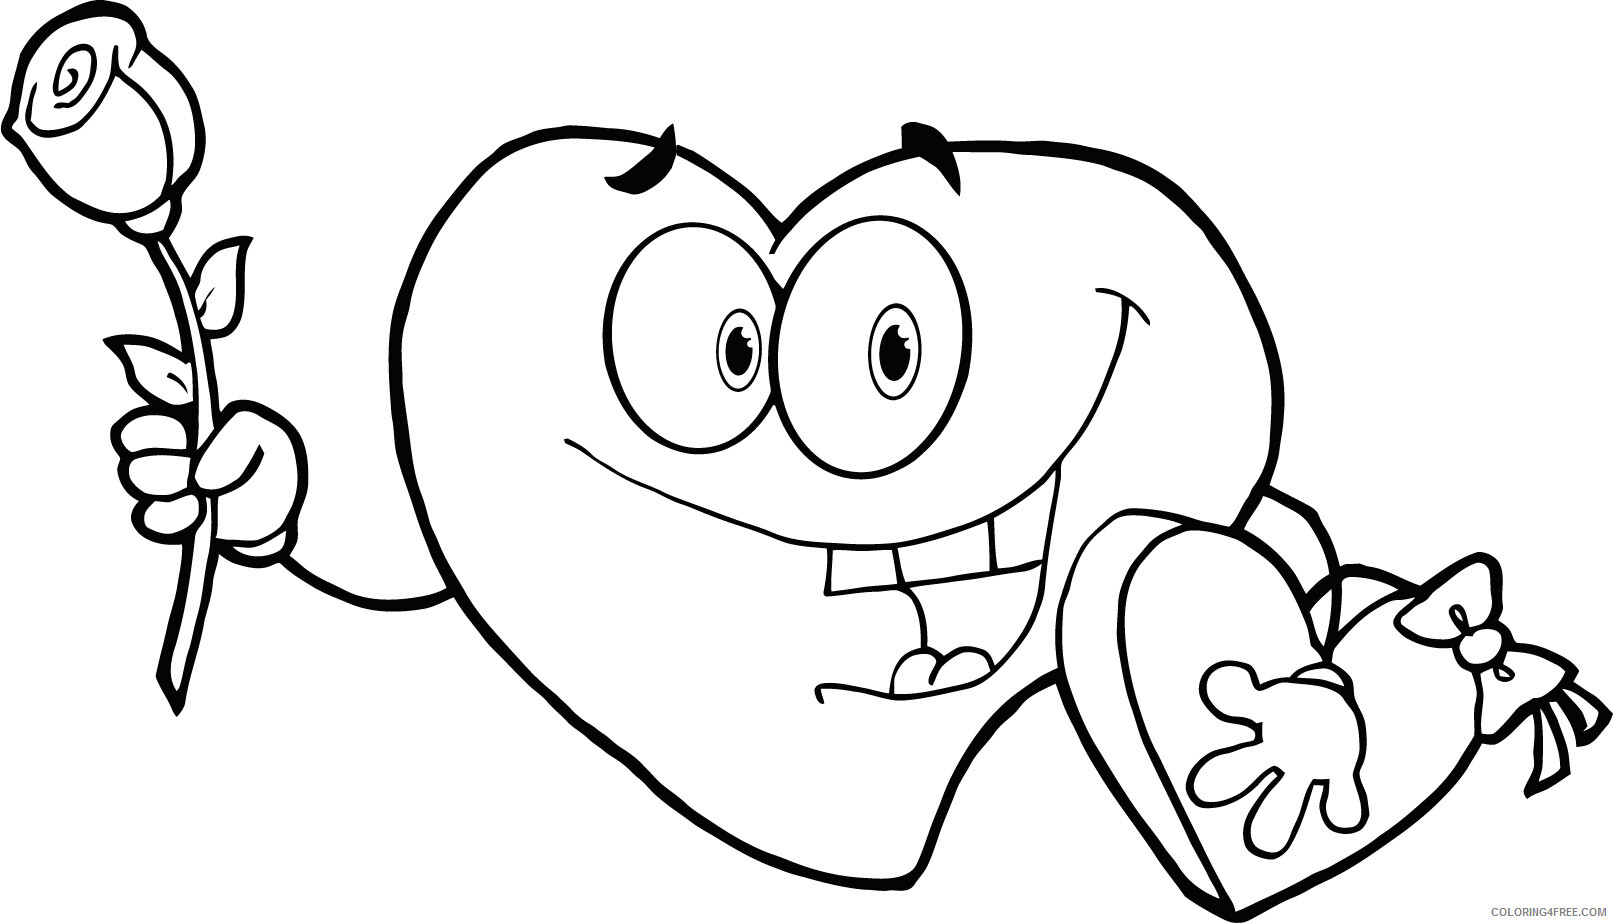 Valentine Heart Coloring Pages Funny Valentine Heart Printable 2021 6107 Coloring4free